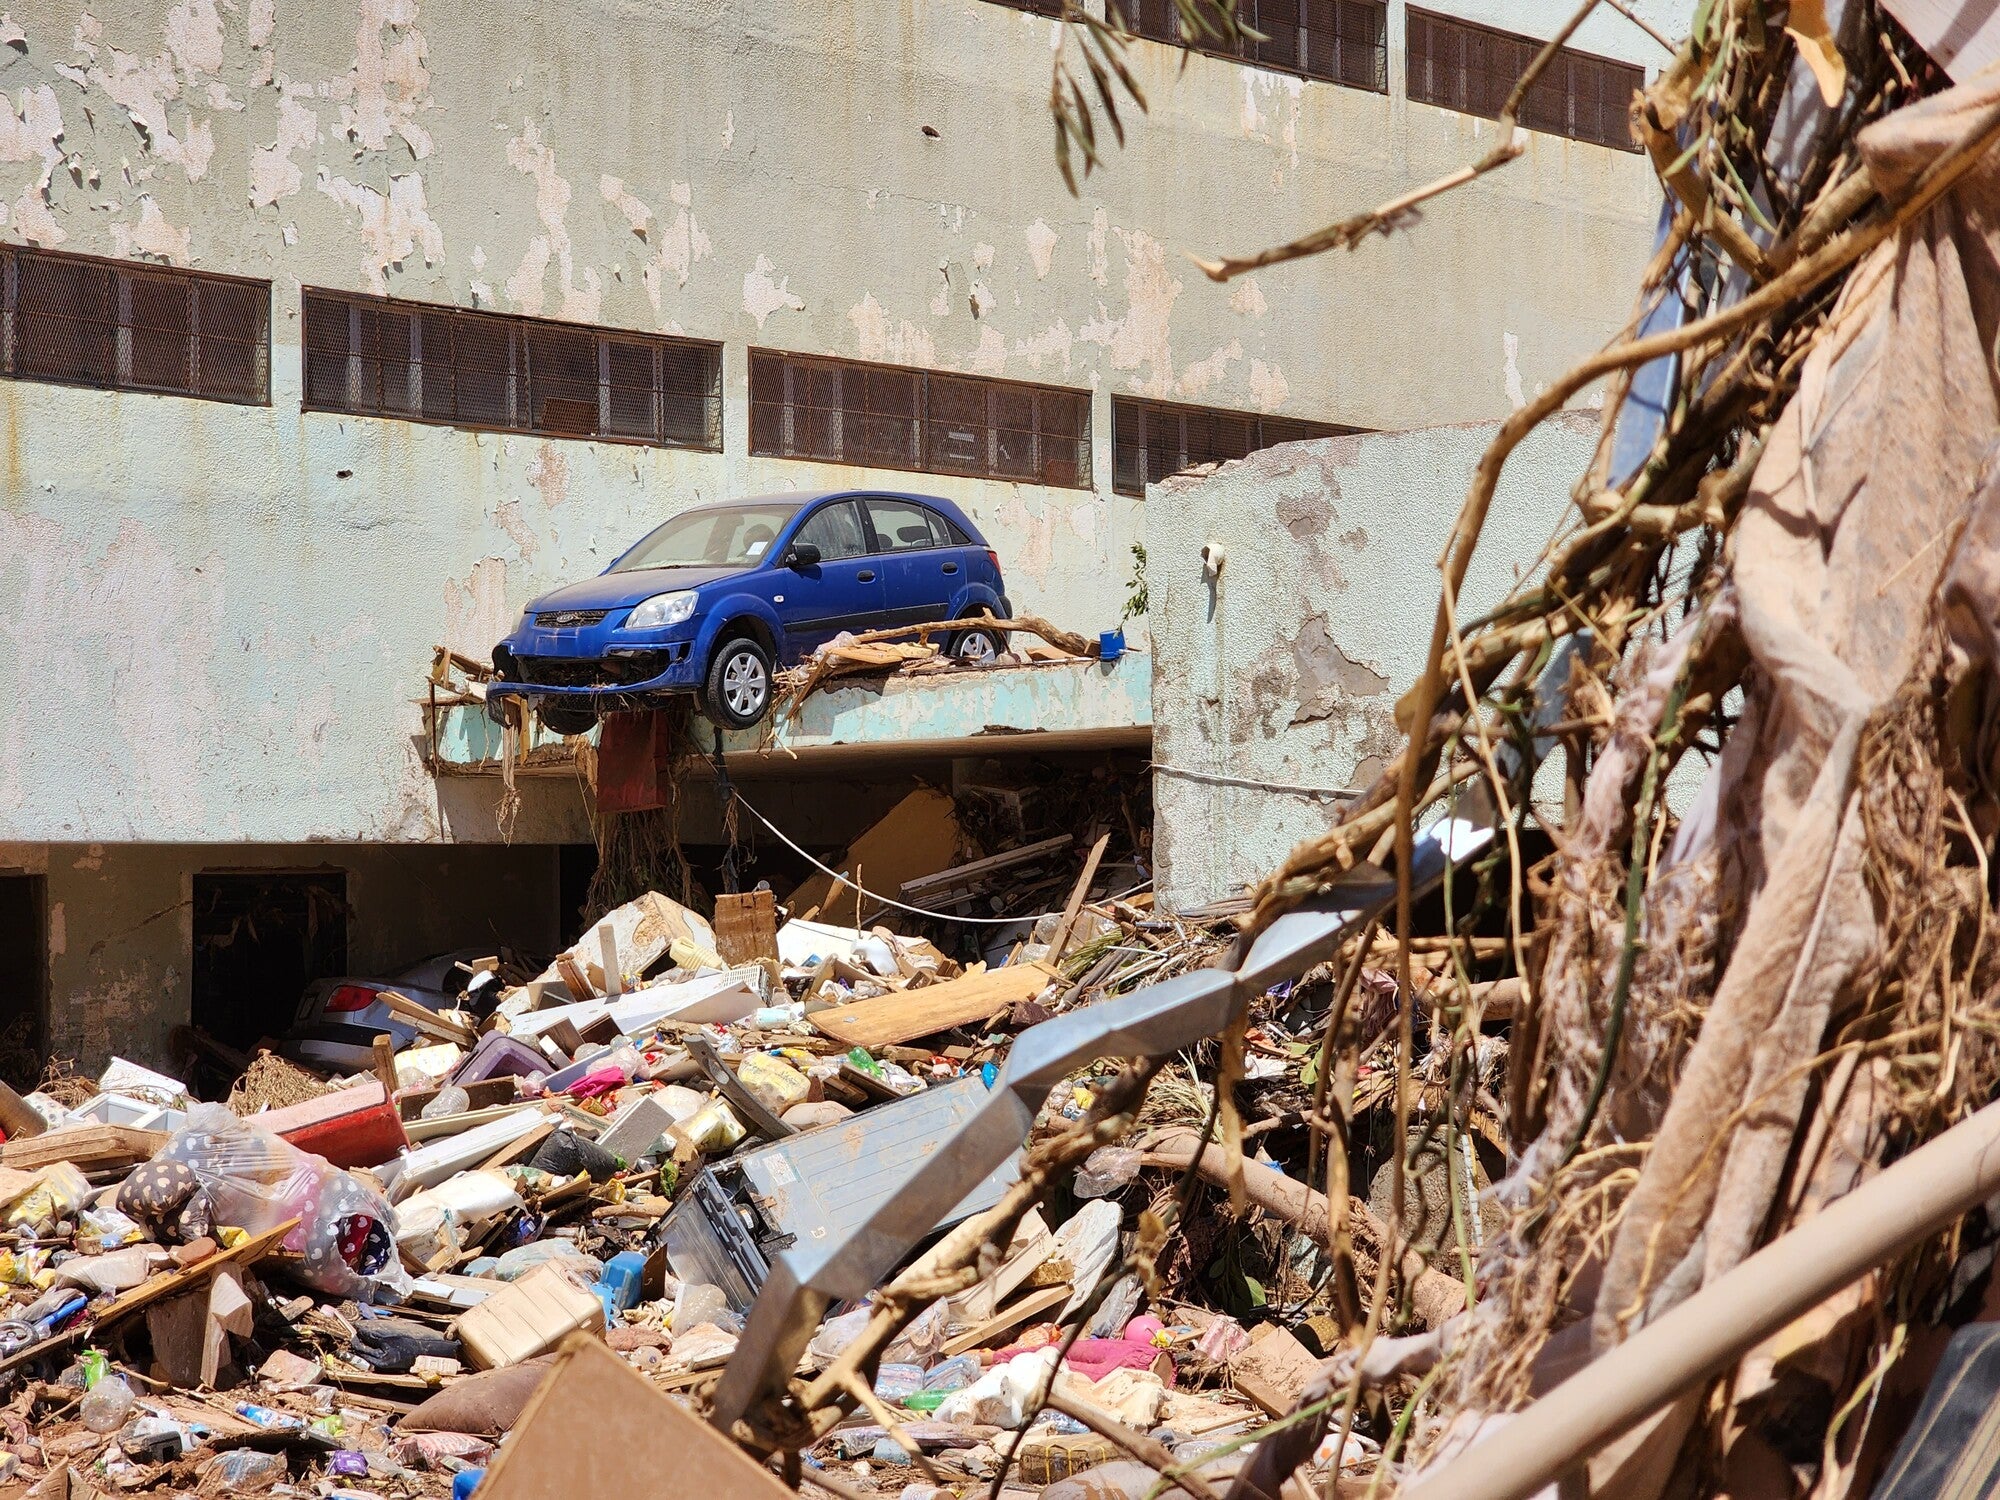 Rubble in foreground, building in background, blue car suspended on a ledge next to building.